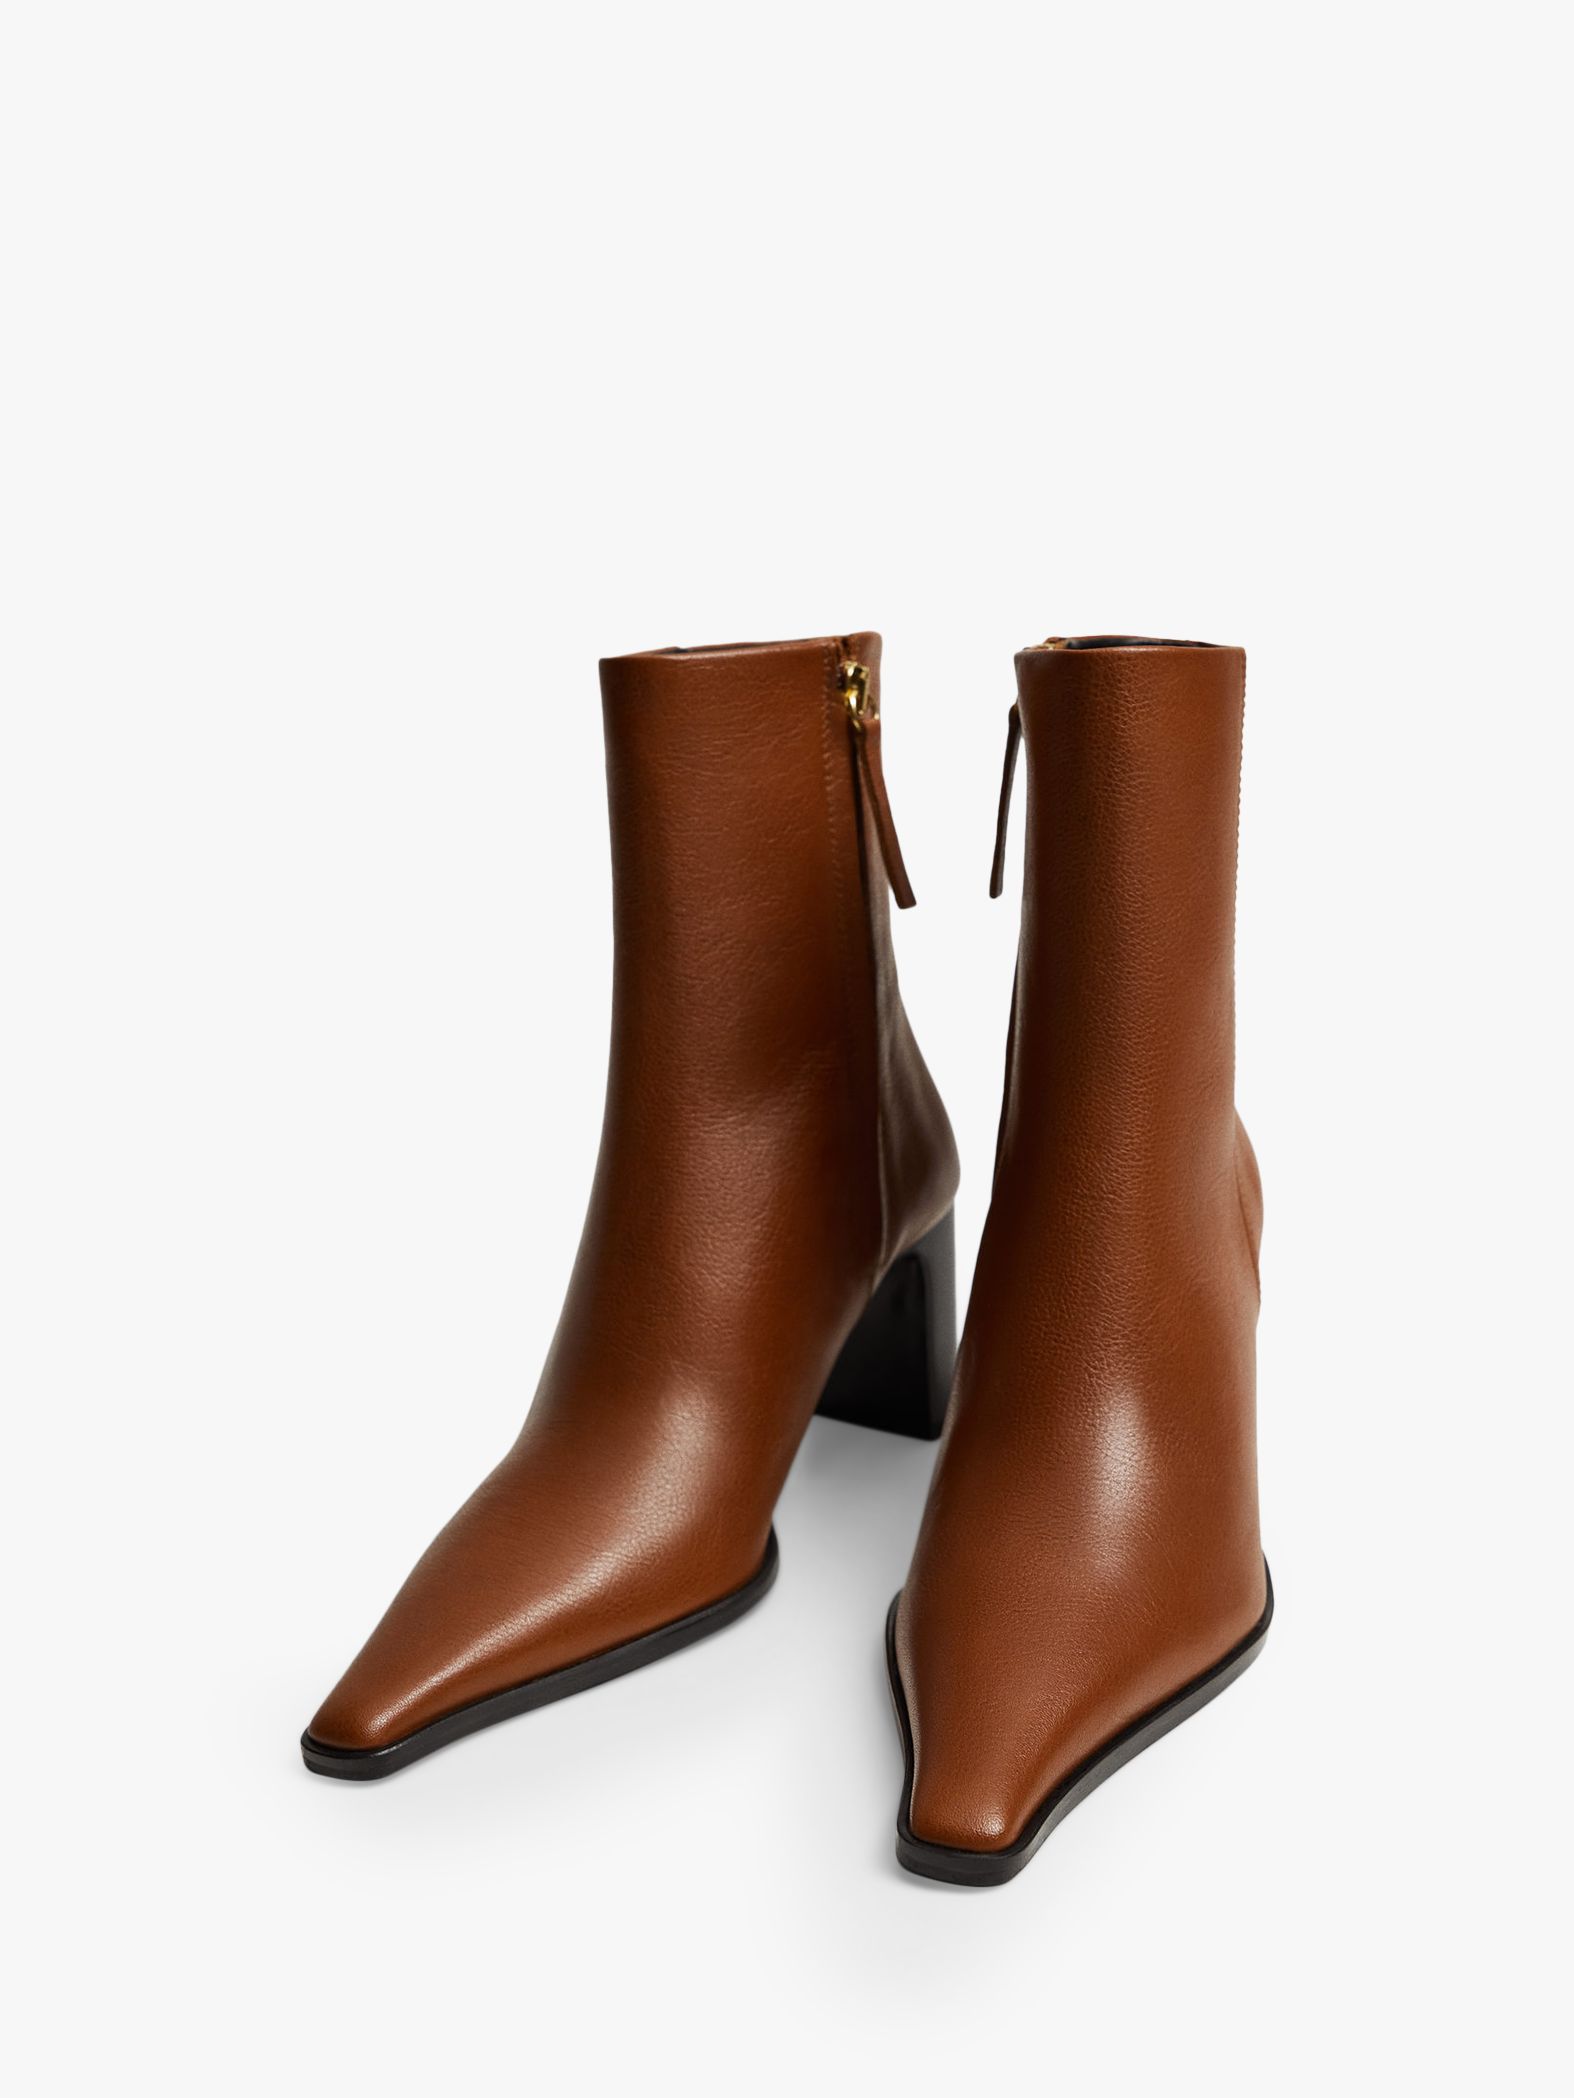 Mango Leather Pointed Toe Ankle Boots Brown At John Lewis And Partners 